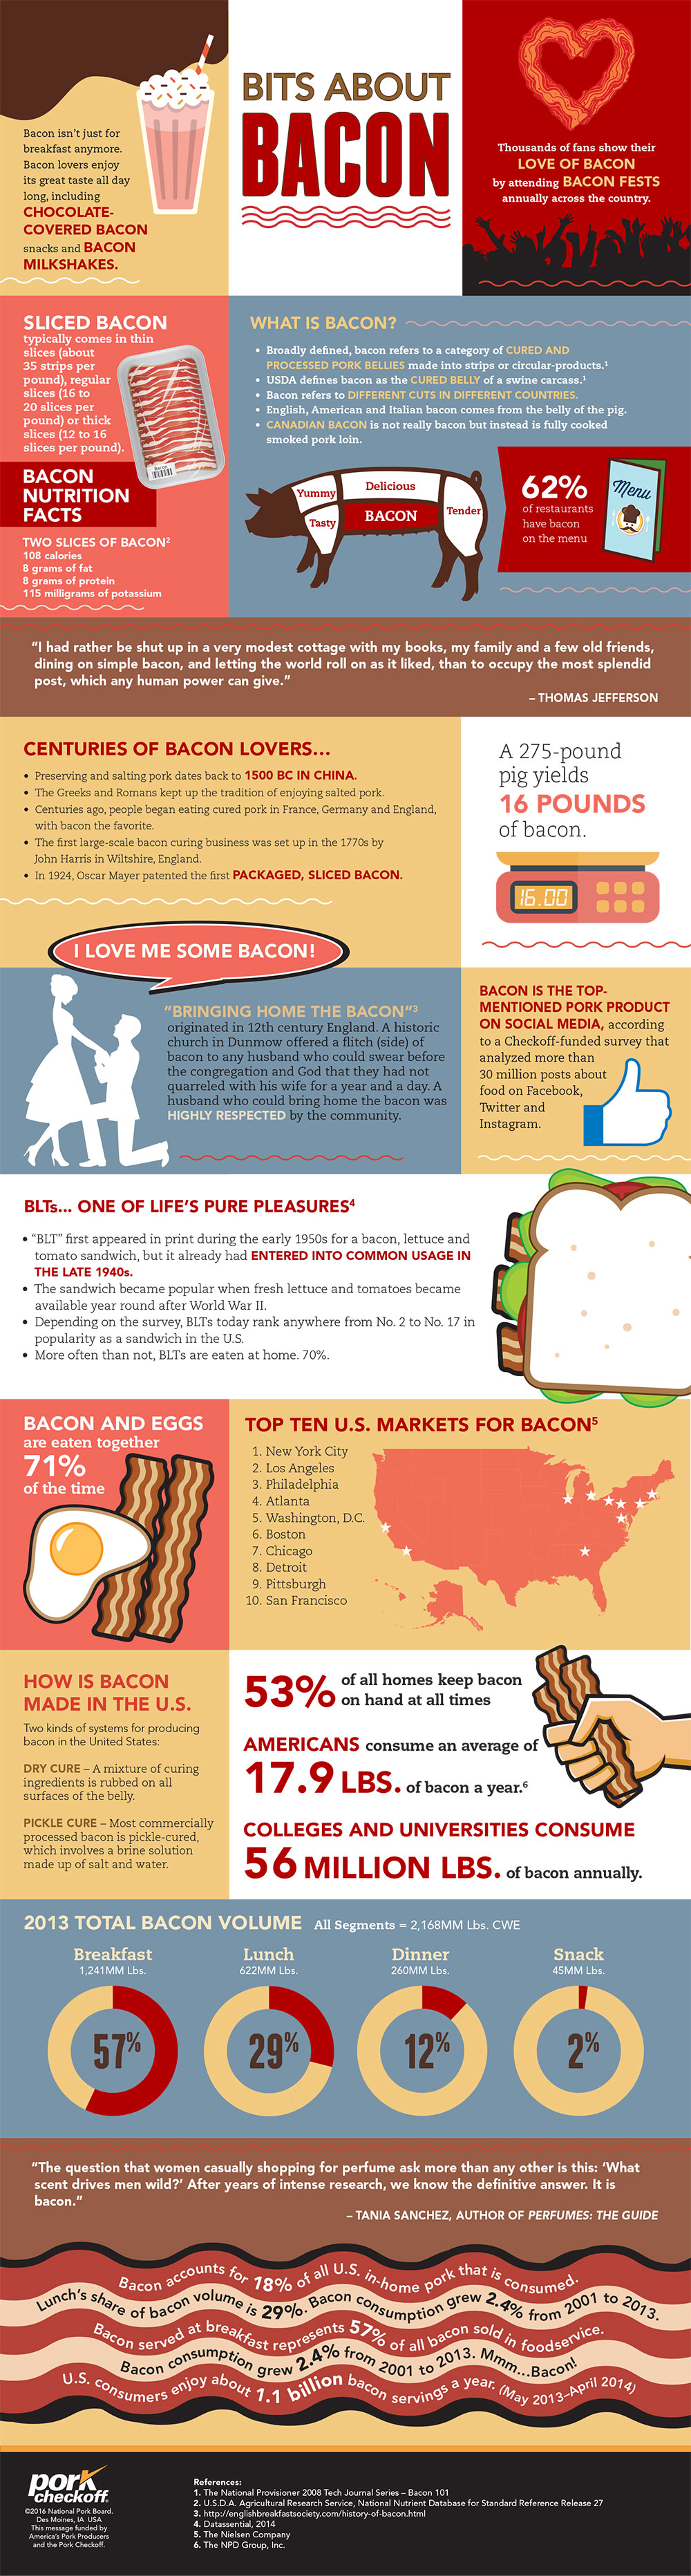 All kinds of fun facts about bacon